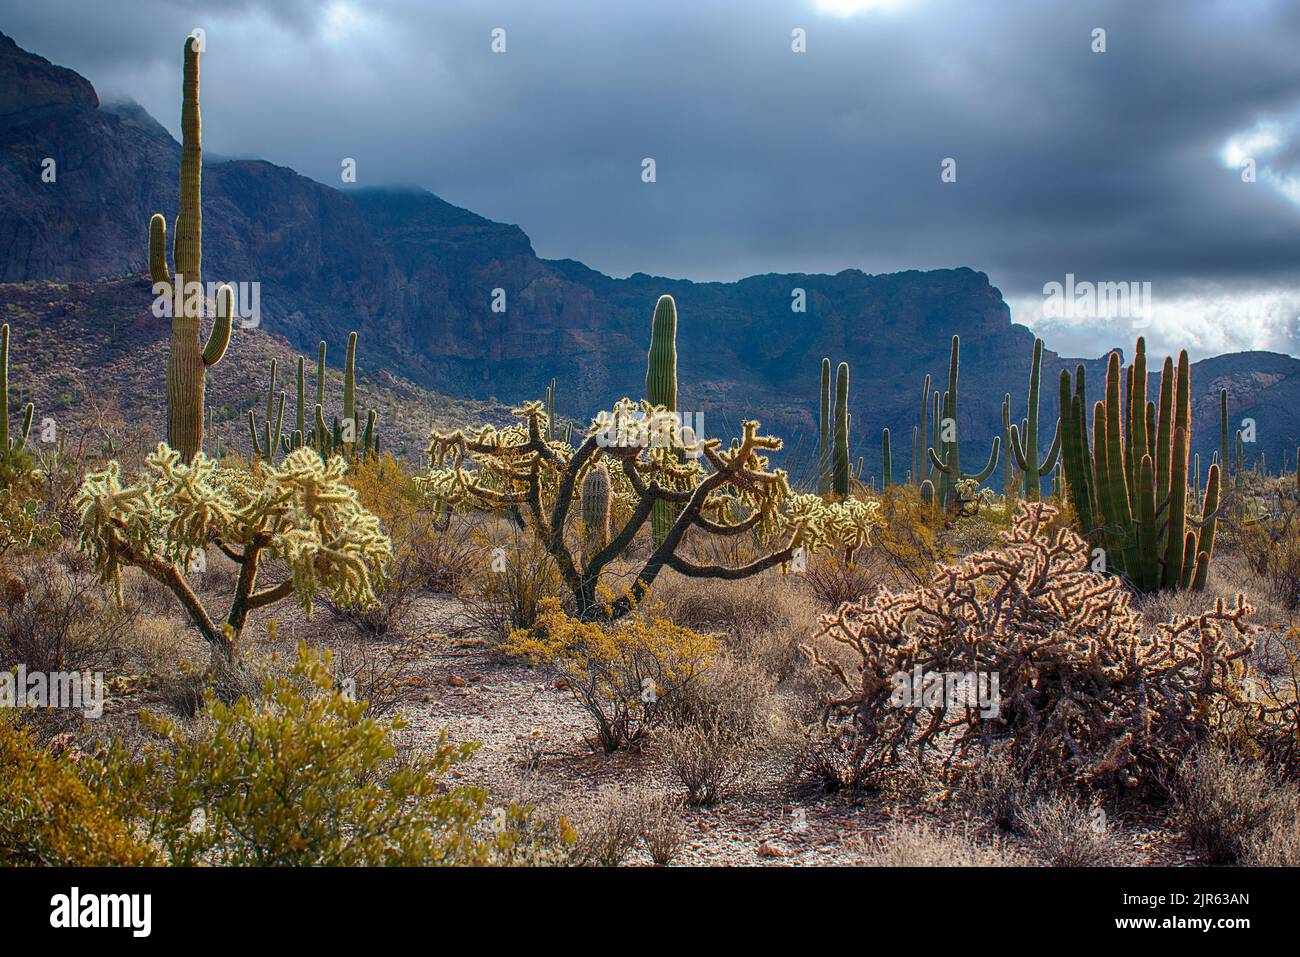 Spectacular desert landscape with many species of cacti  in Organ Pipe Cactus National Monument, southern Arizona. Stock Photo